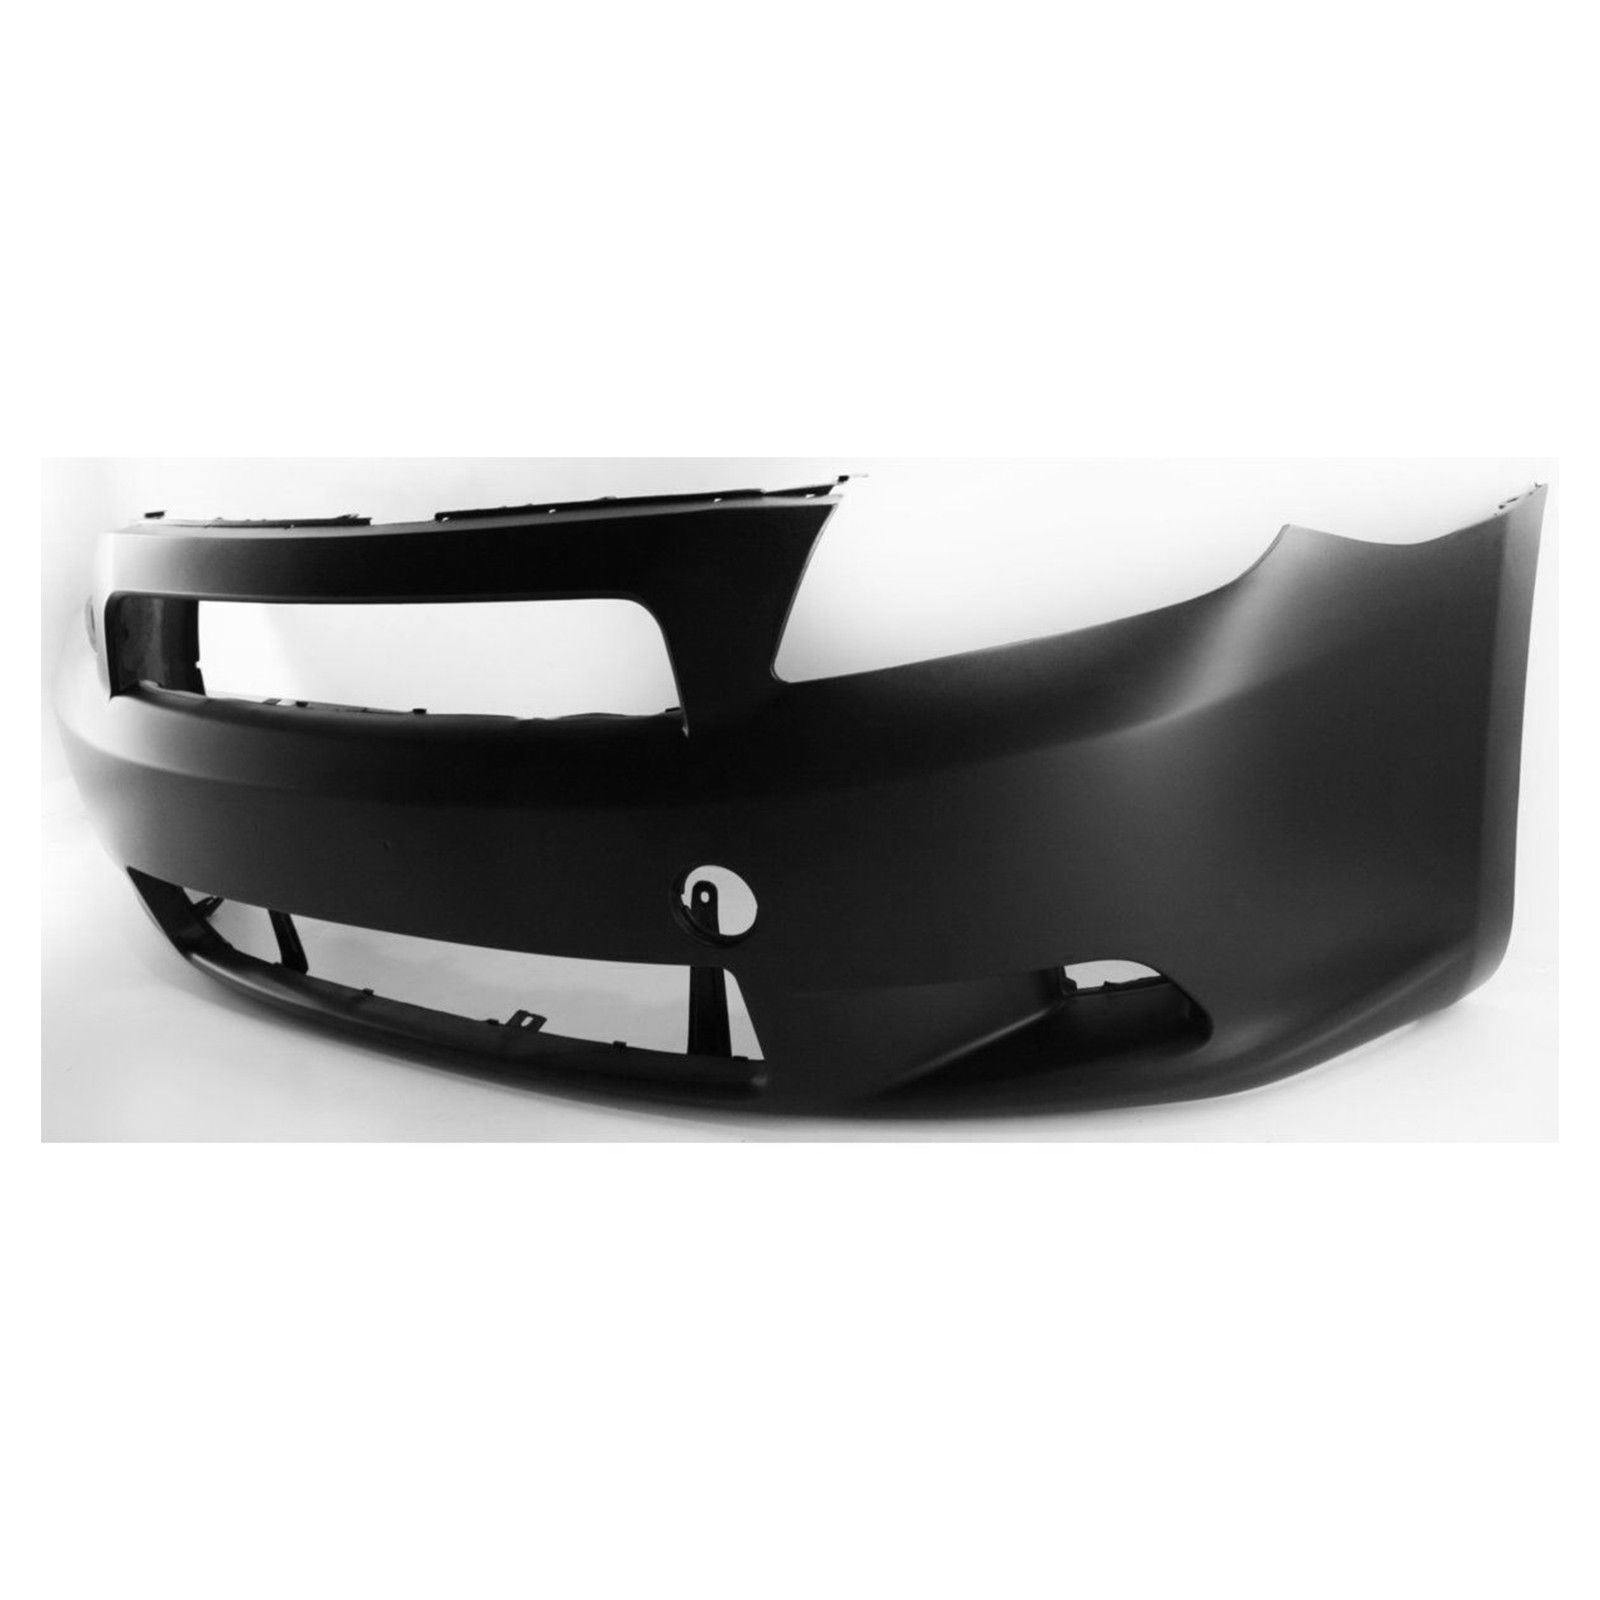 2005-2010 SCION TC Front Bumper Cover Painted to Match